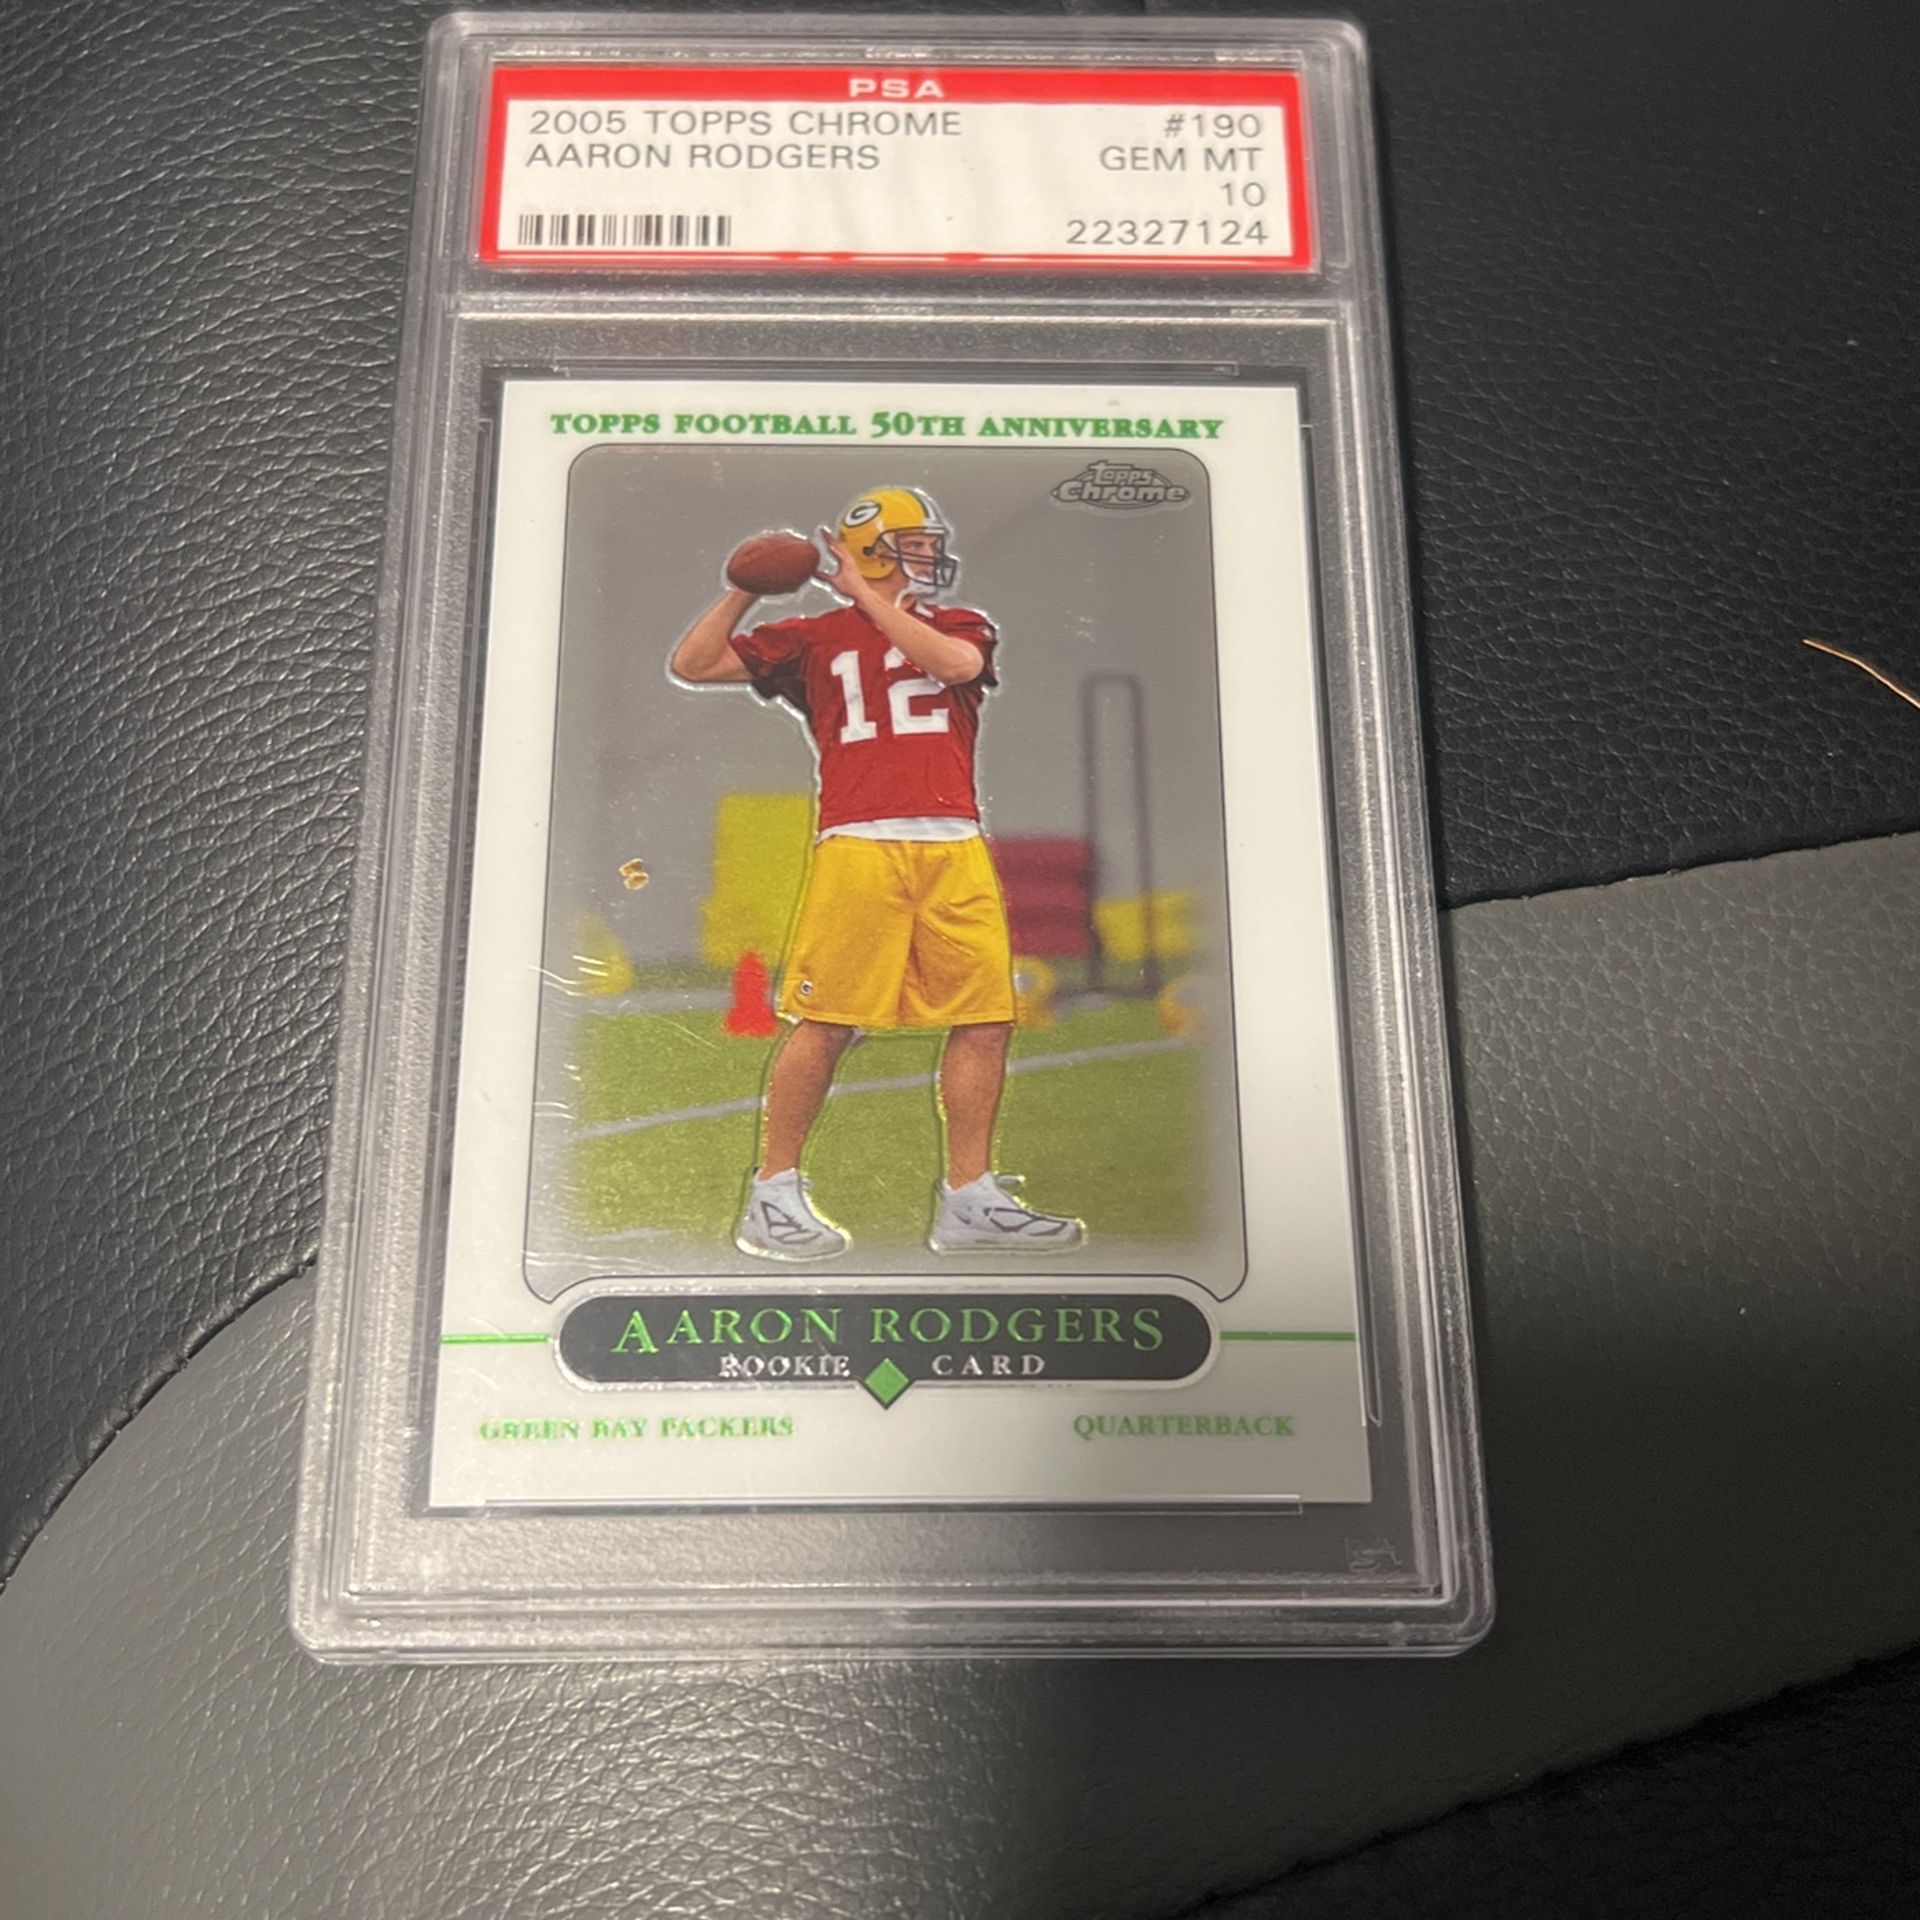 2005 Topps Chrome Aaron Rodgers Rookie